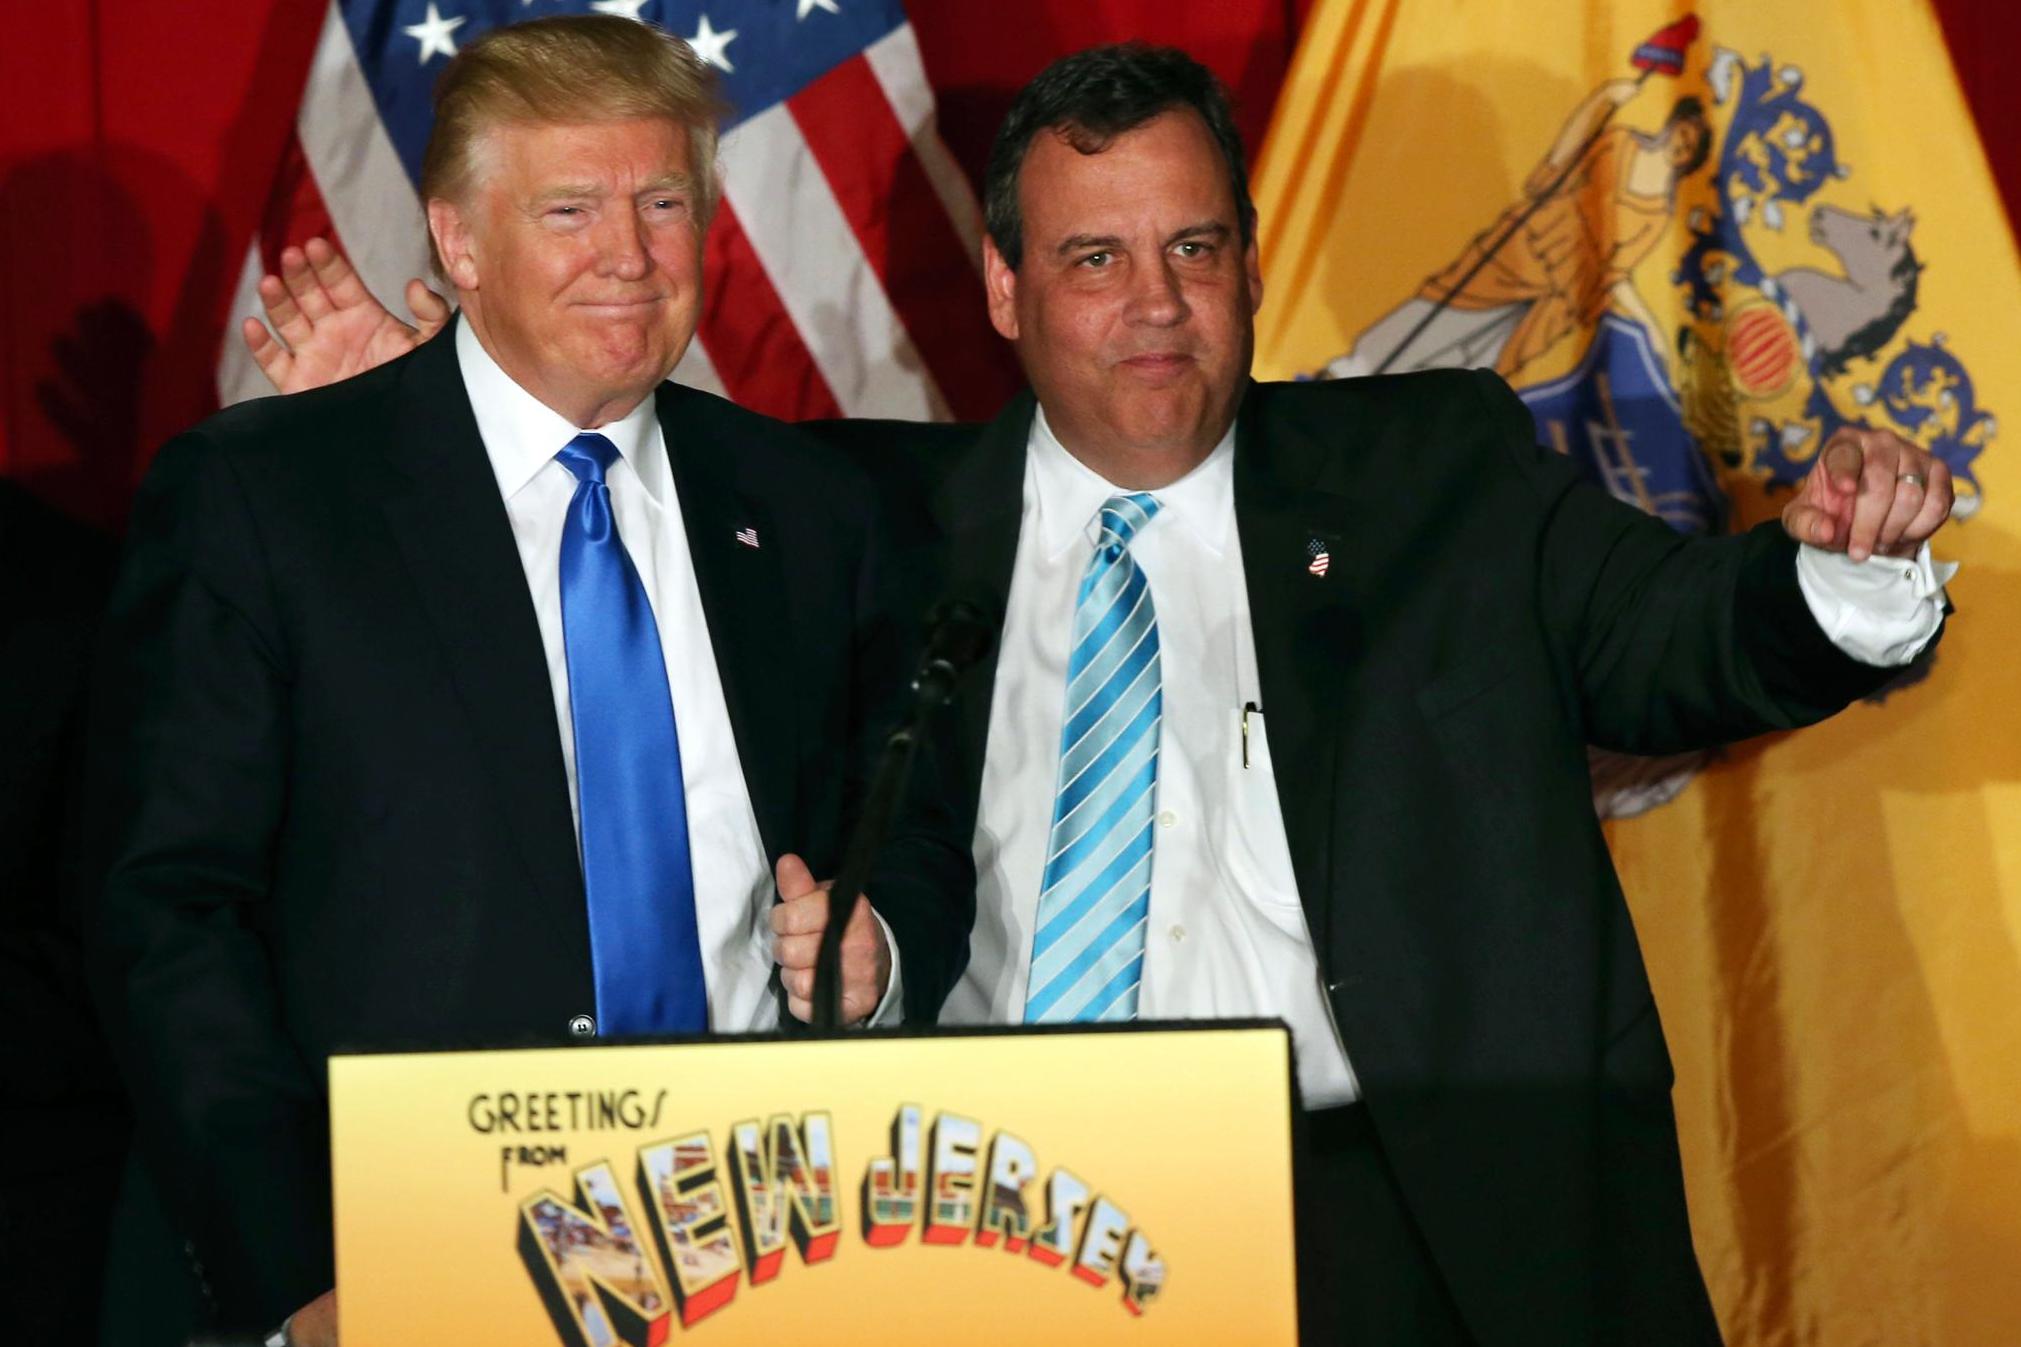 Trump spoke at the National Guard Armory at a fundraiser to cover Chris Christie's campaign debt AP